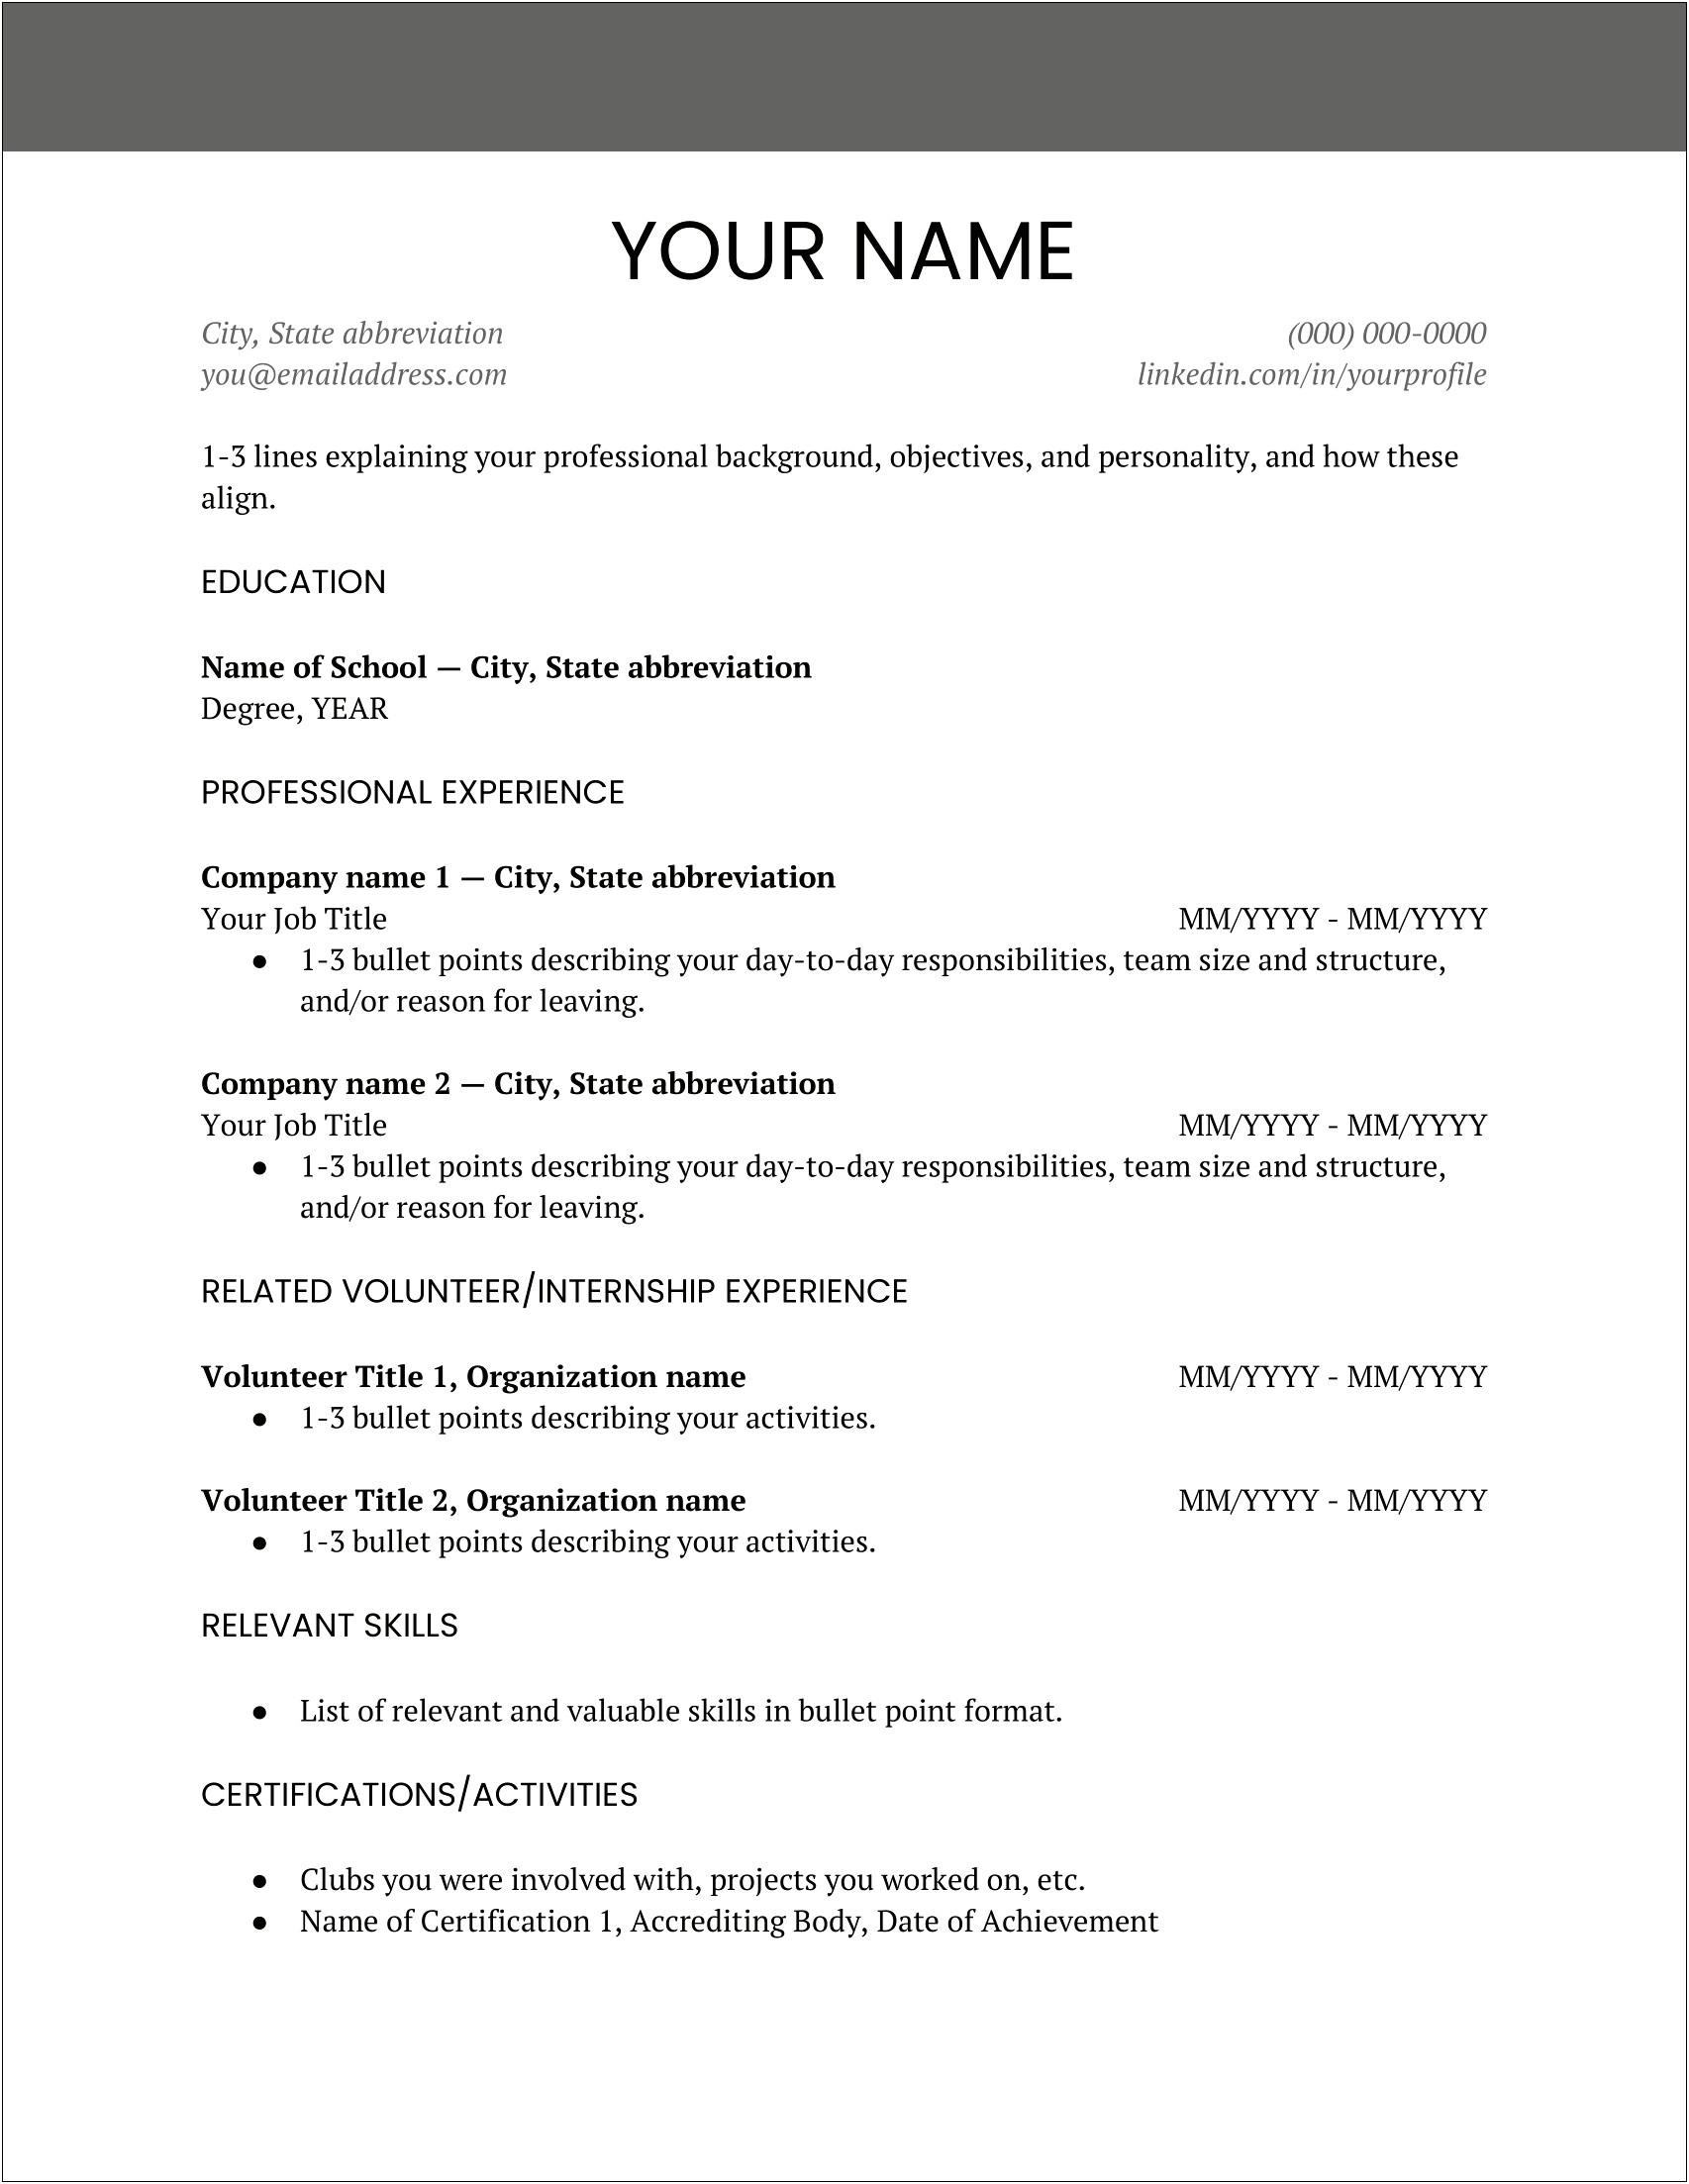 Bachelor Of Science Healthcare Management Abbreviation On Resume